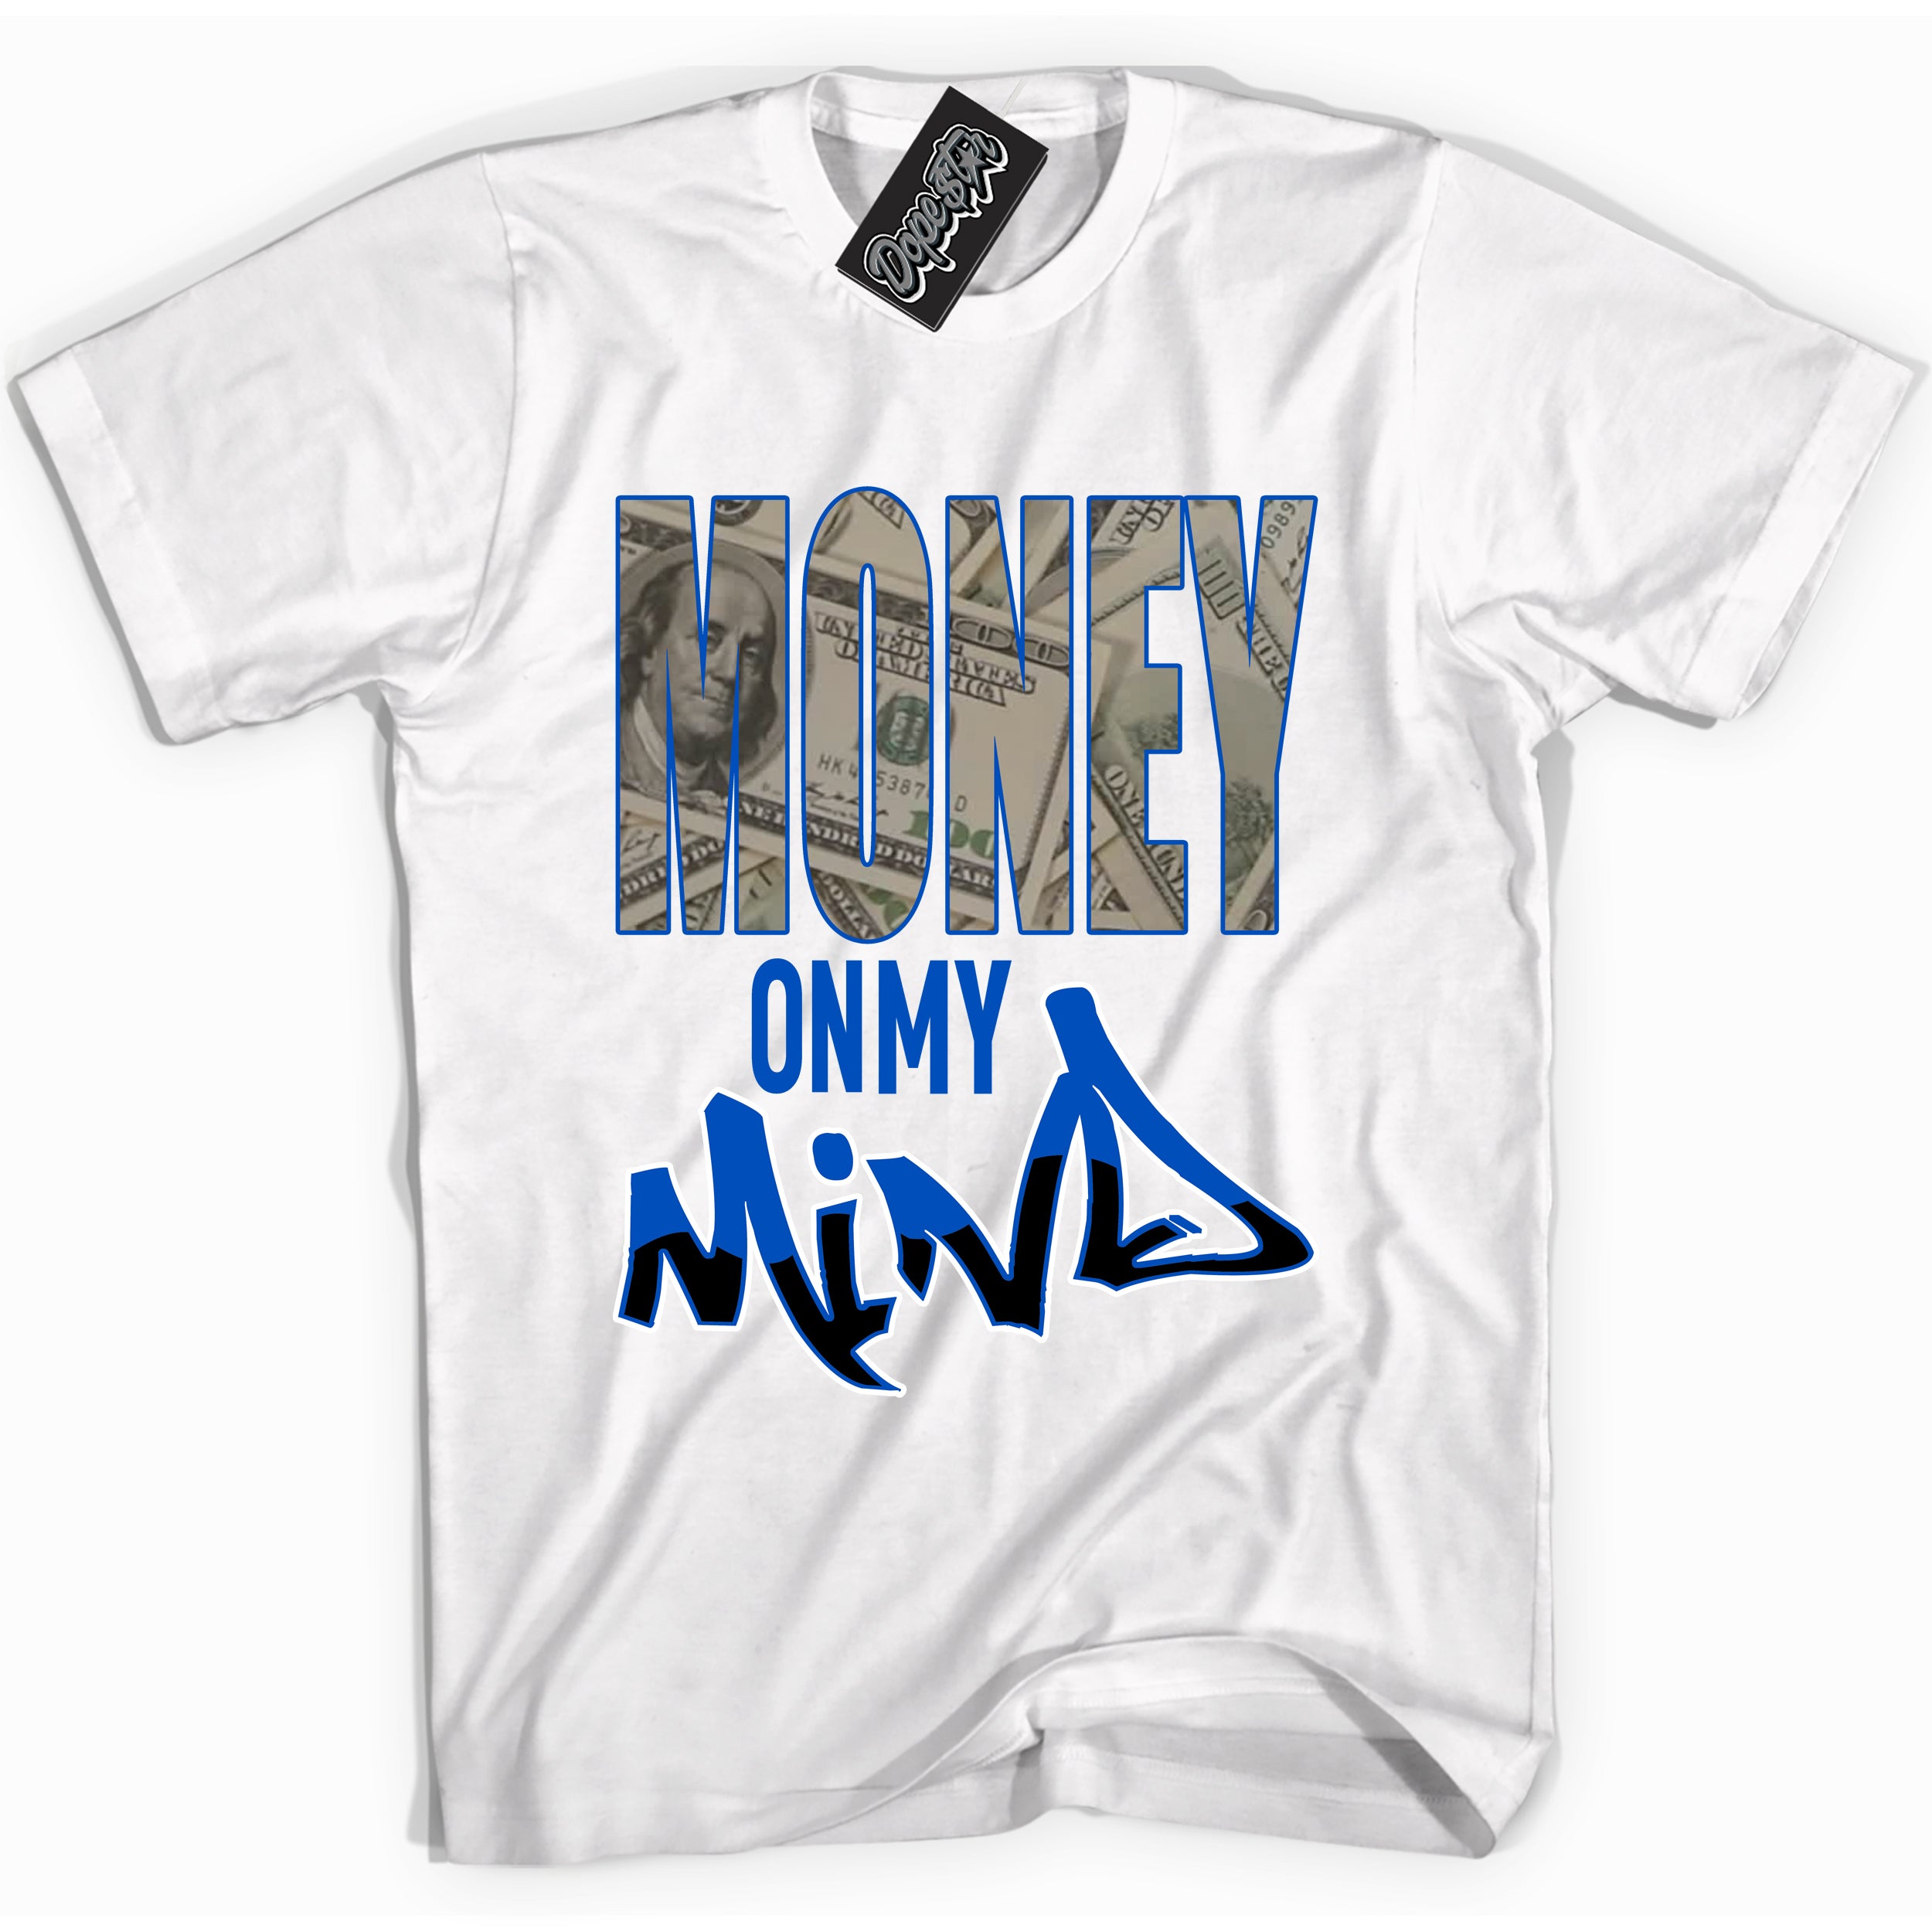 Cool White graphic tee with Money On My Mind print, that perfectly matches OG Royal Reimagined 1s sneakers 